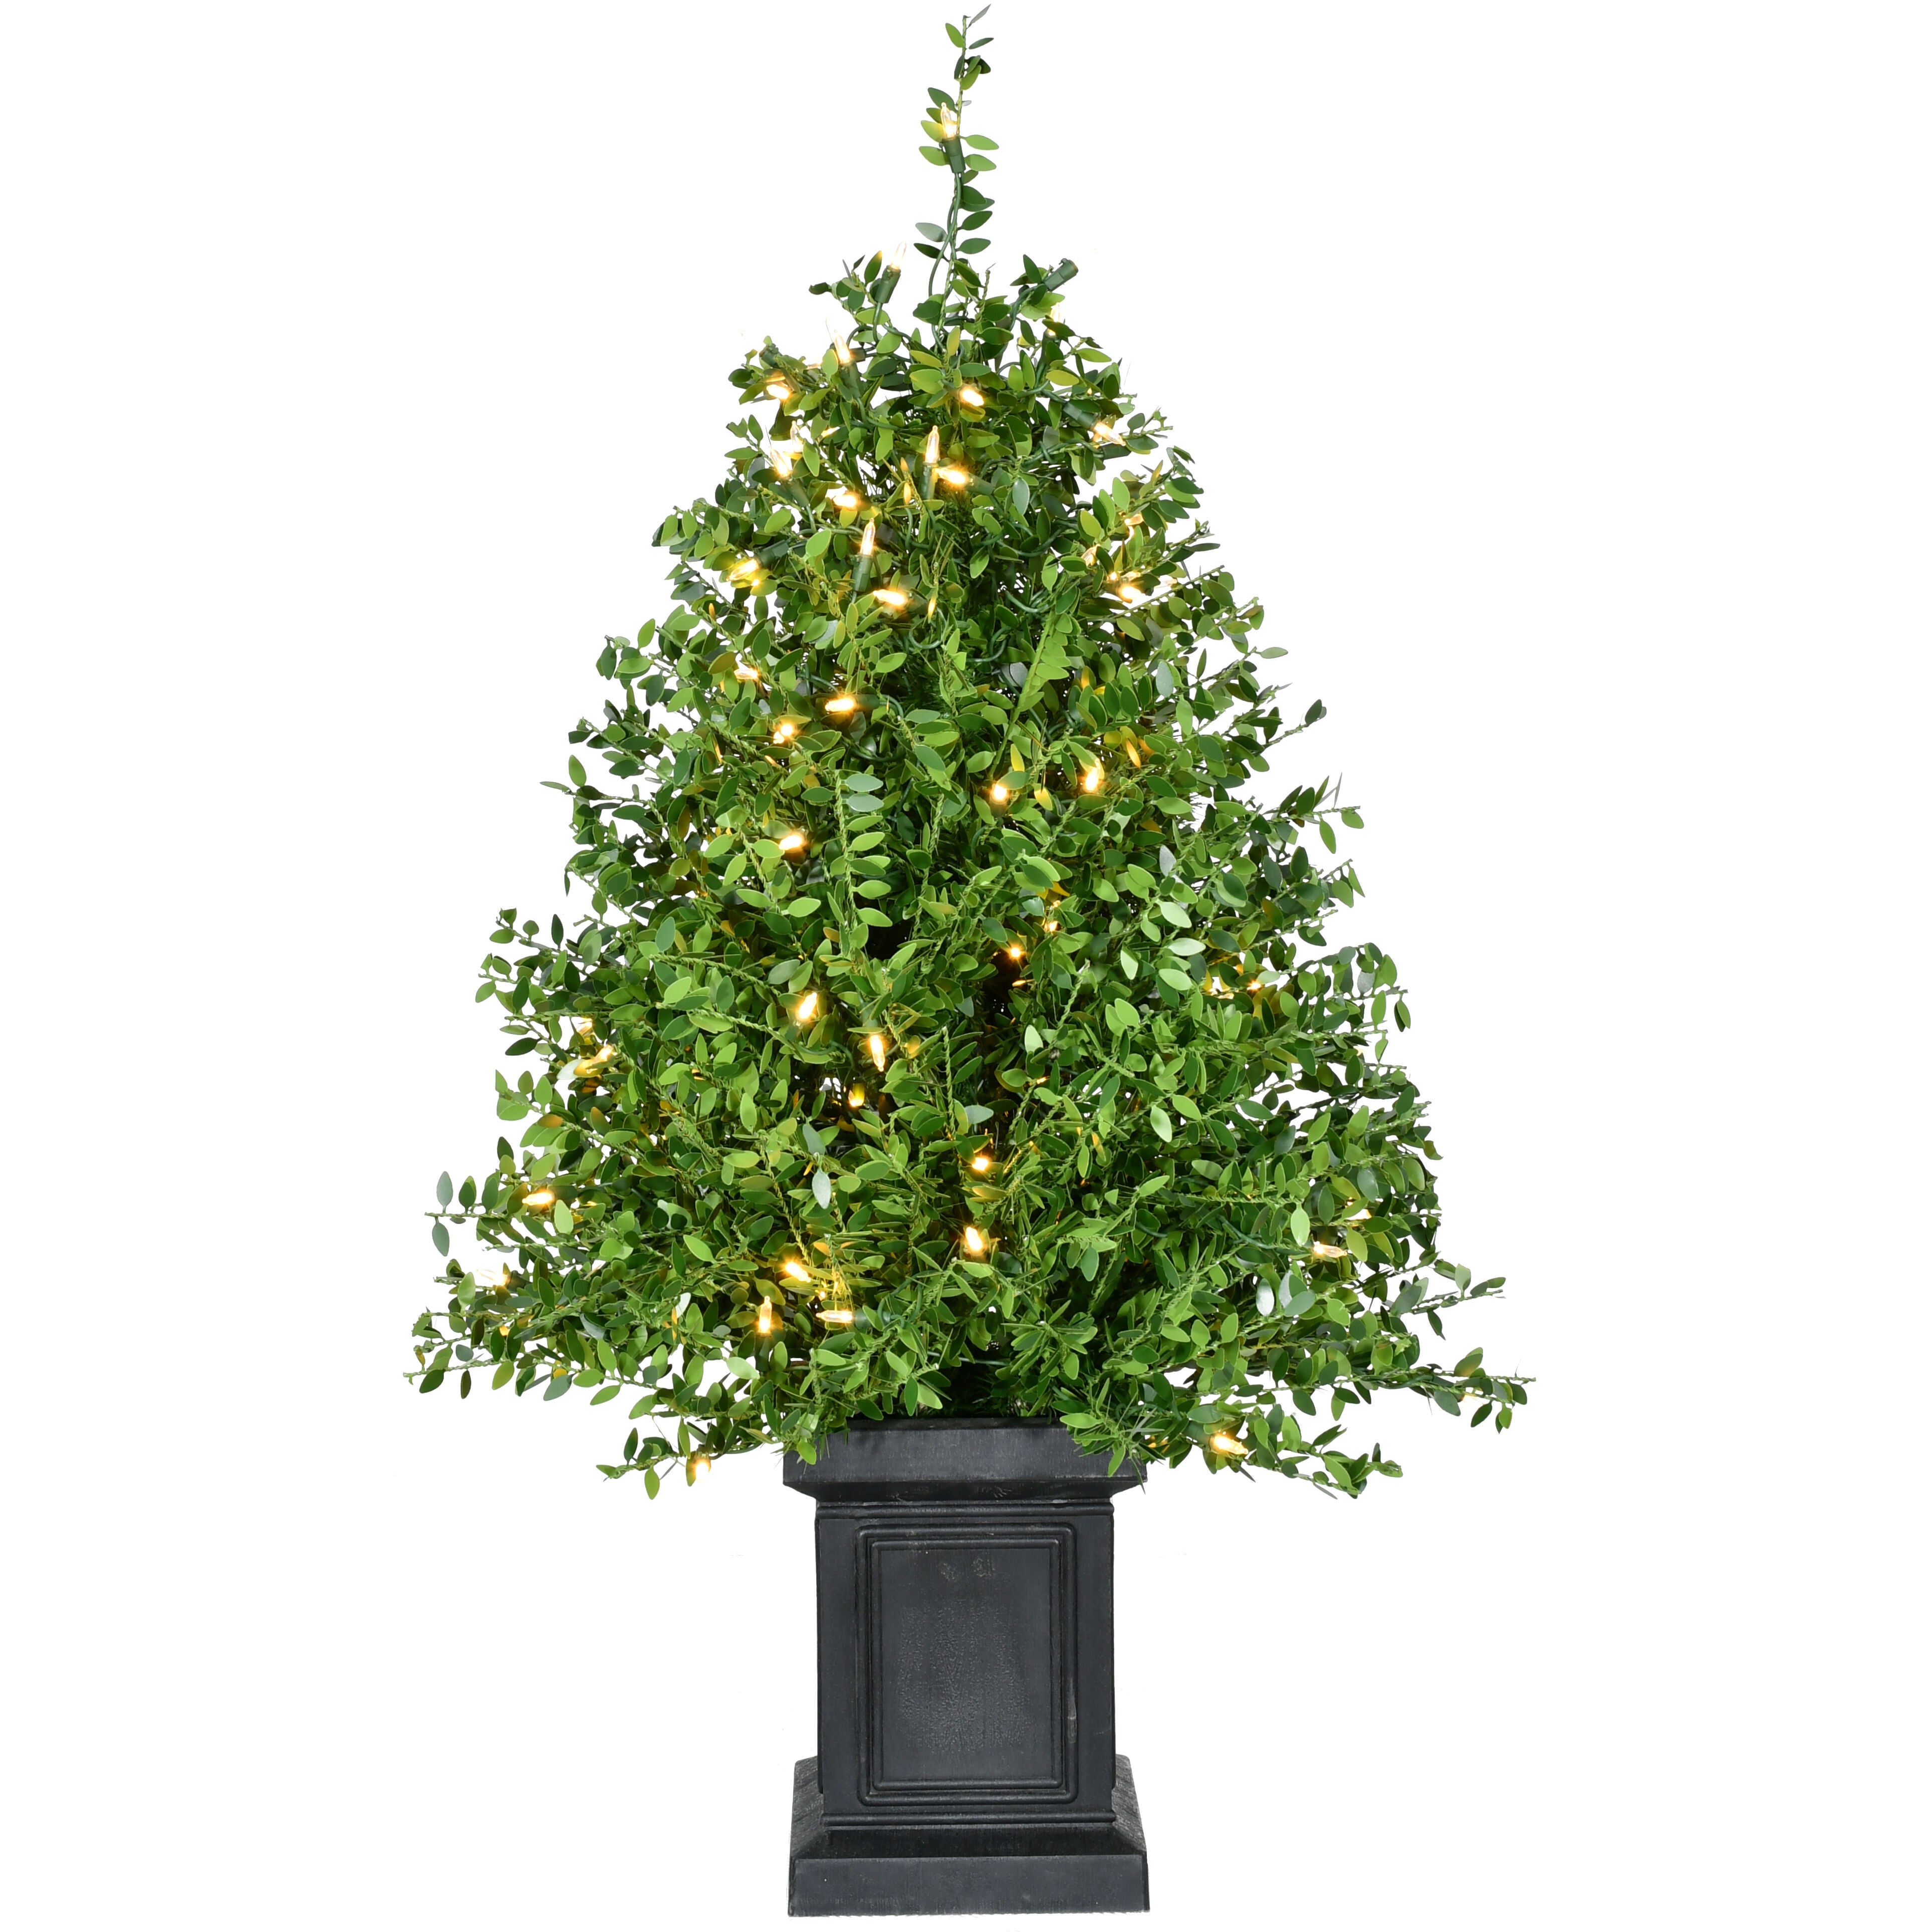 Fraser Hill Farm -  3-Ft. Boxwood Porch Tree in Black Pot with Warm White Lights, Set of 2